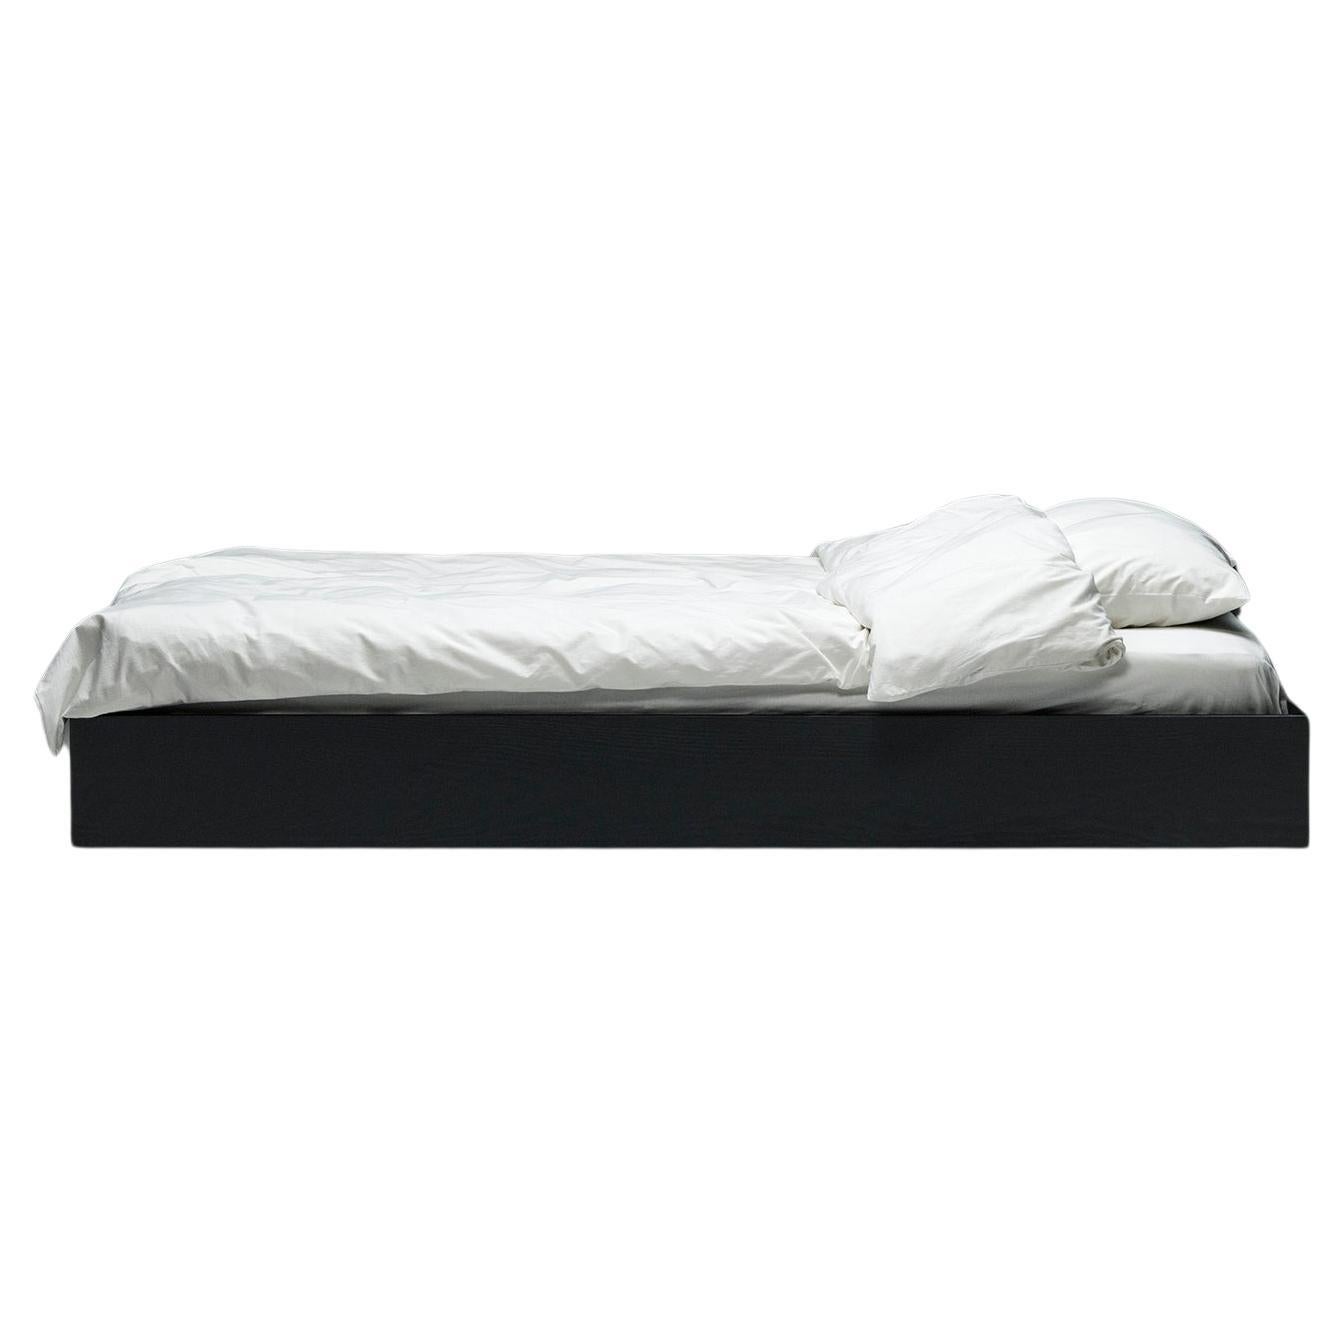 The Floating Bed - Black For Sale